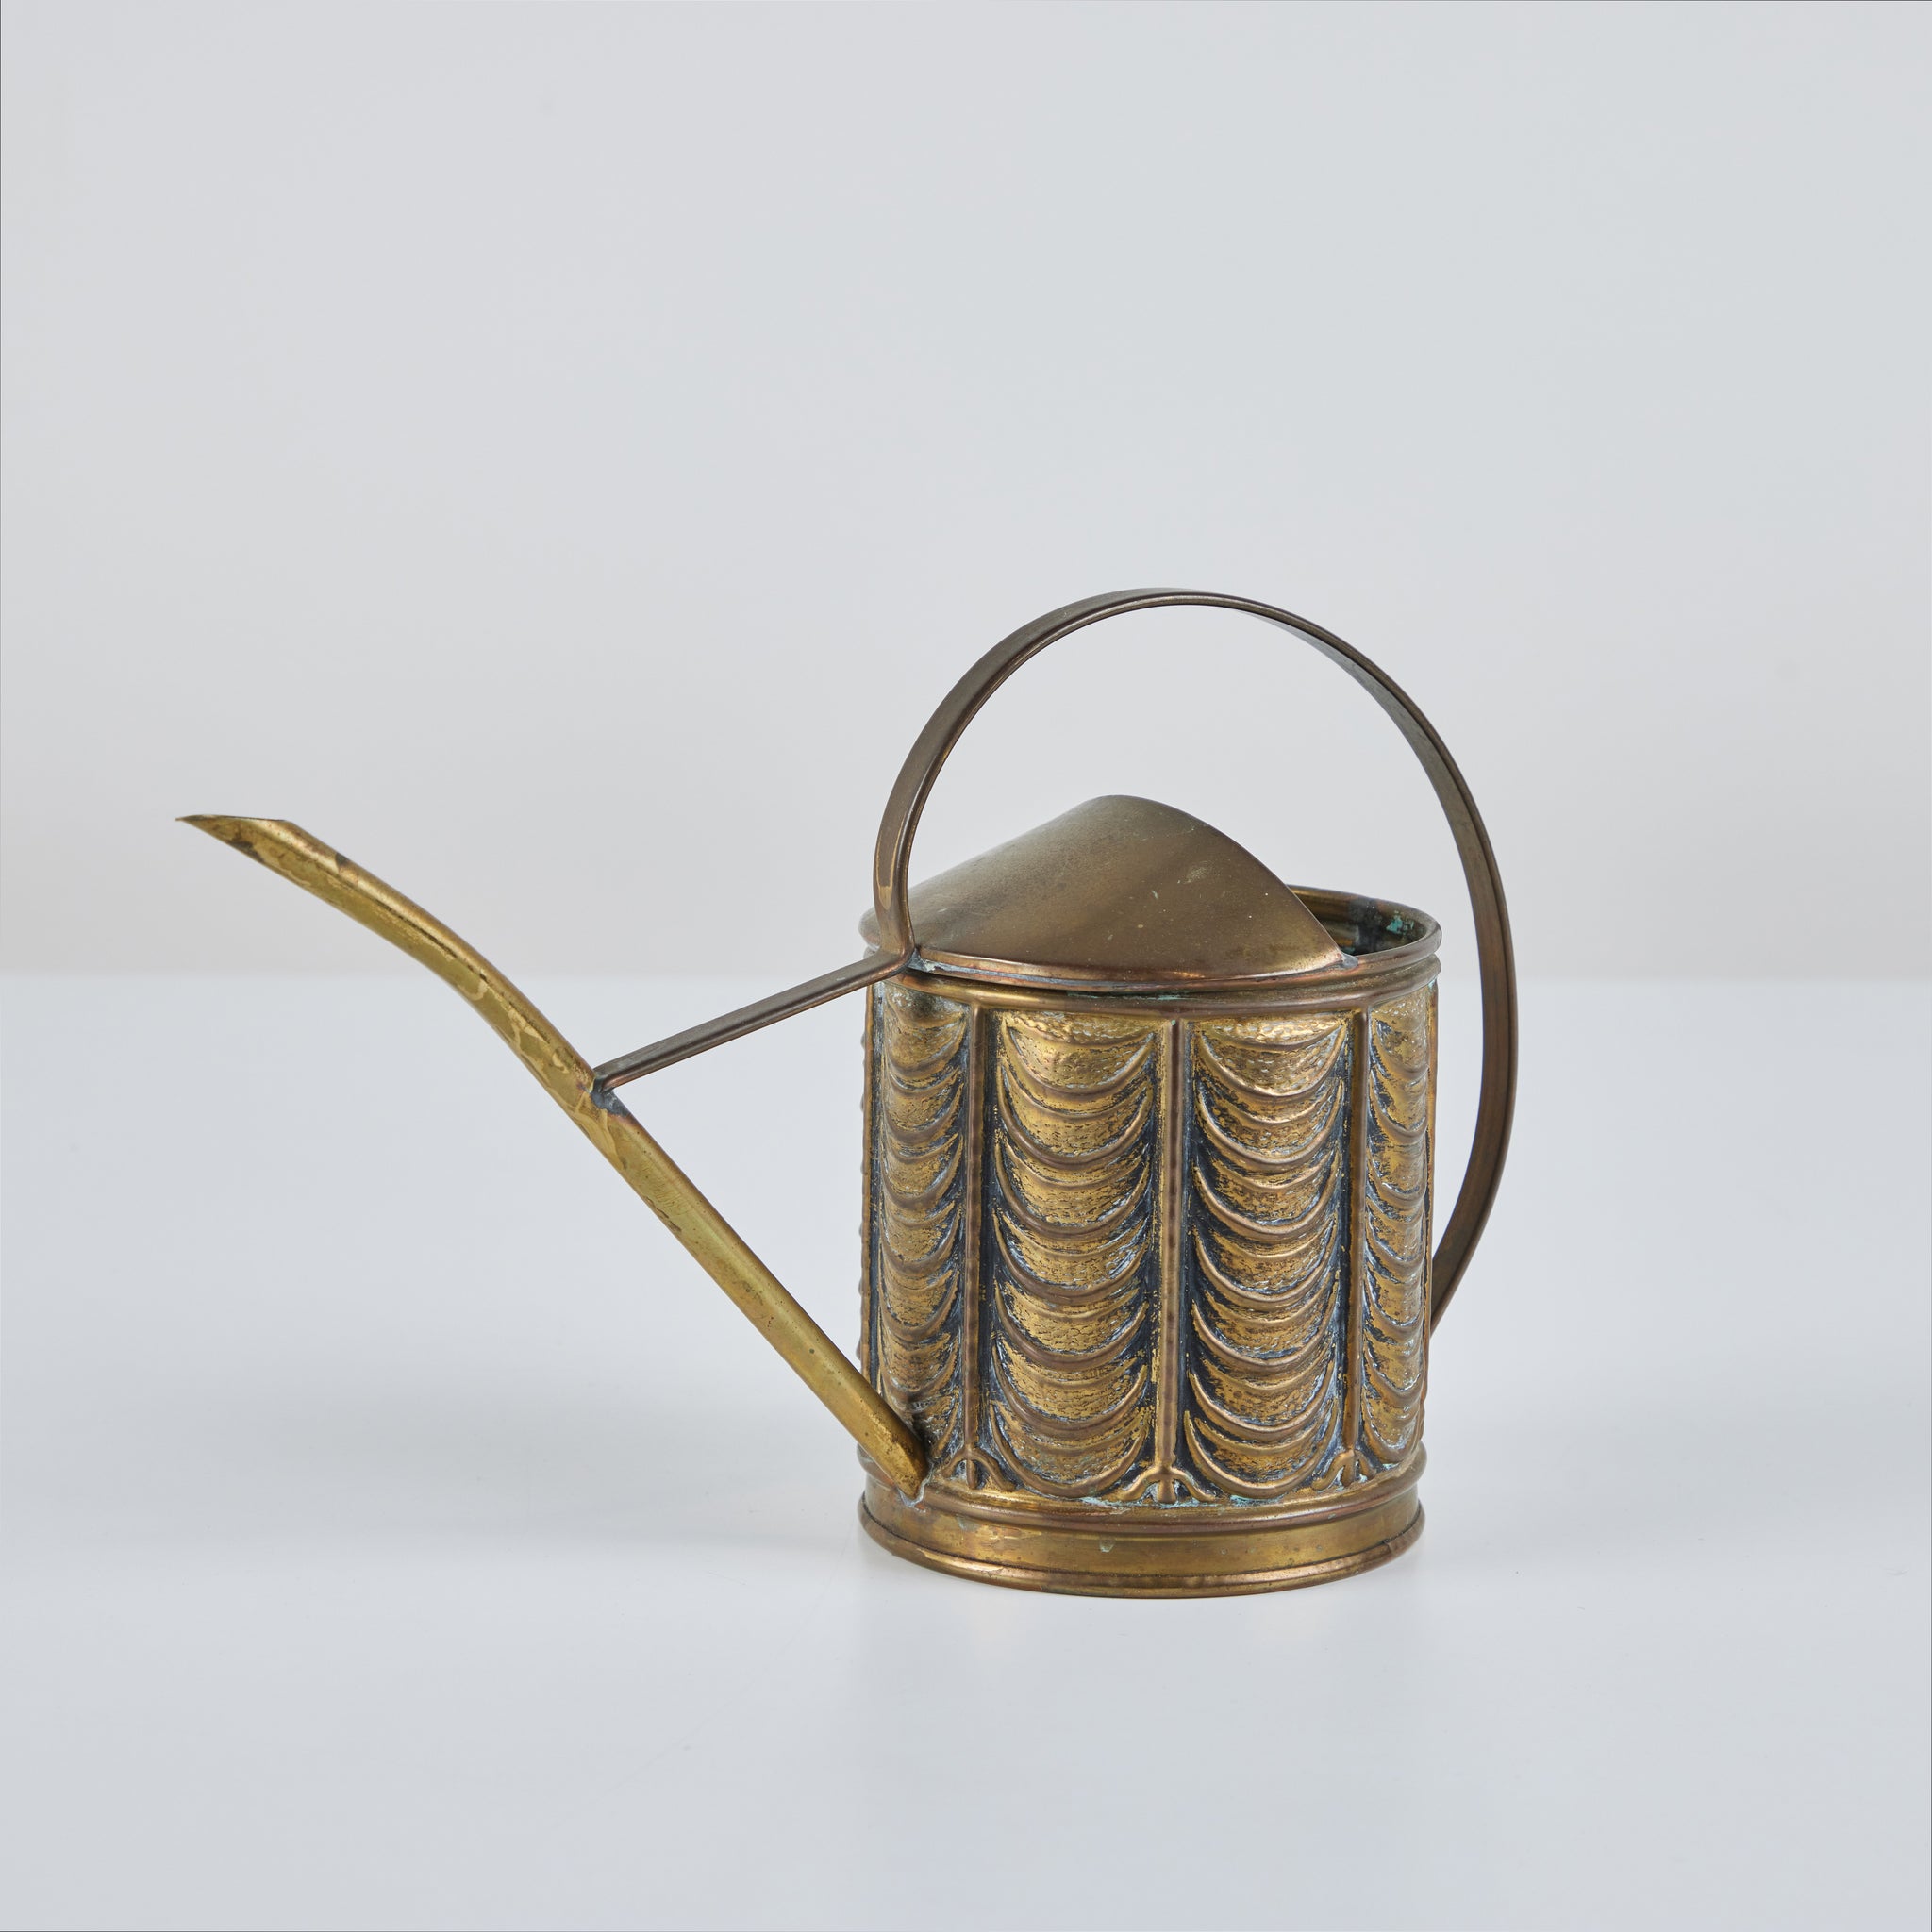 Brass Textured Watering Can by Peerage